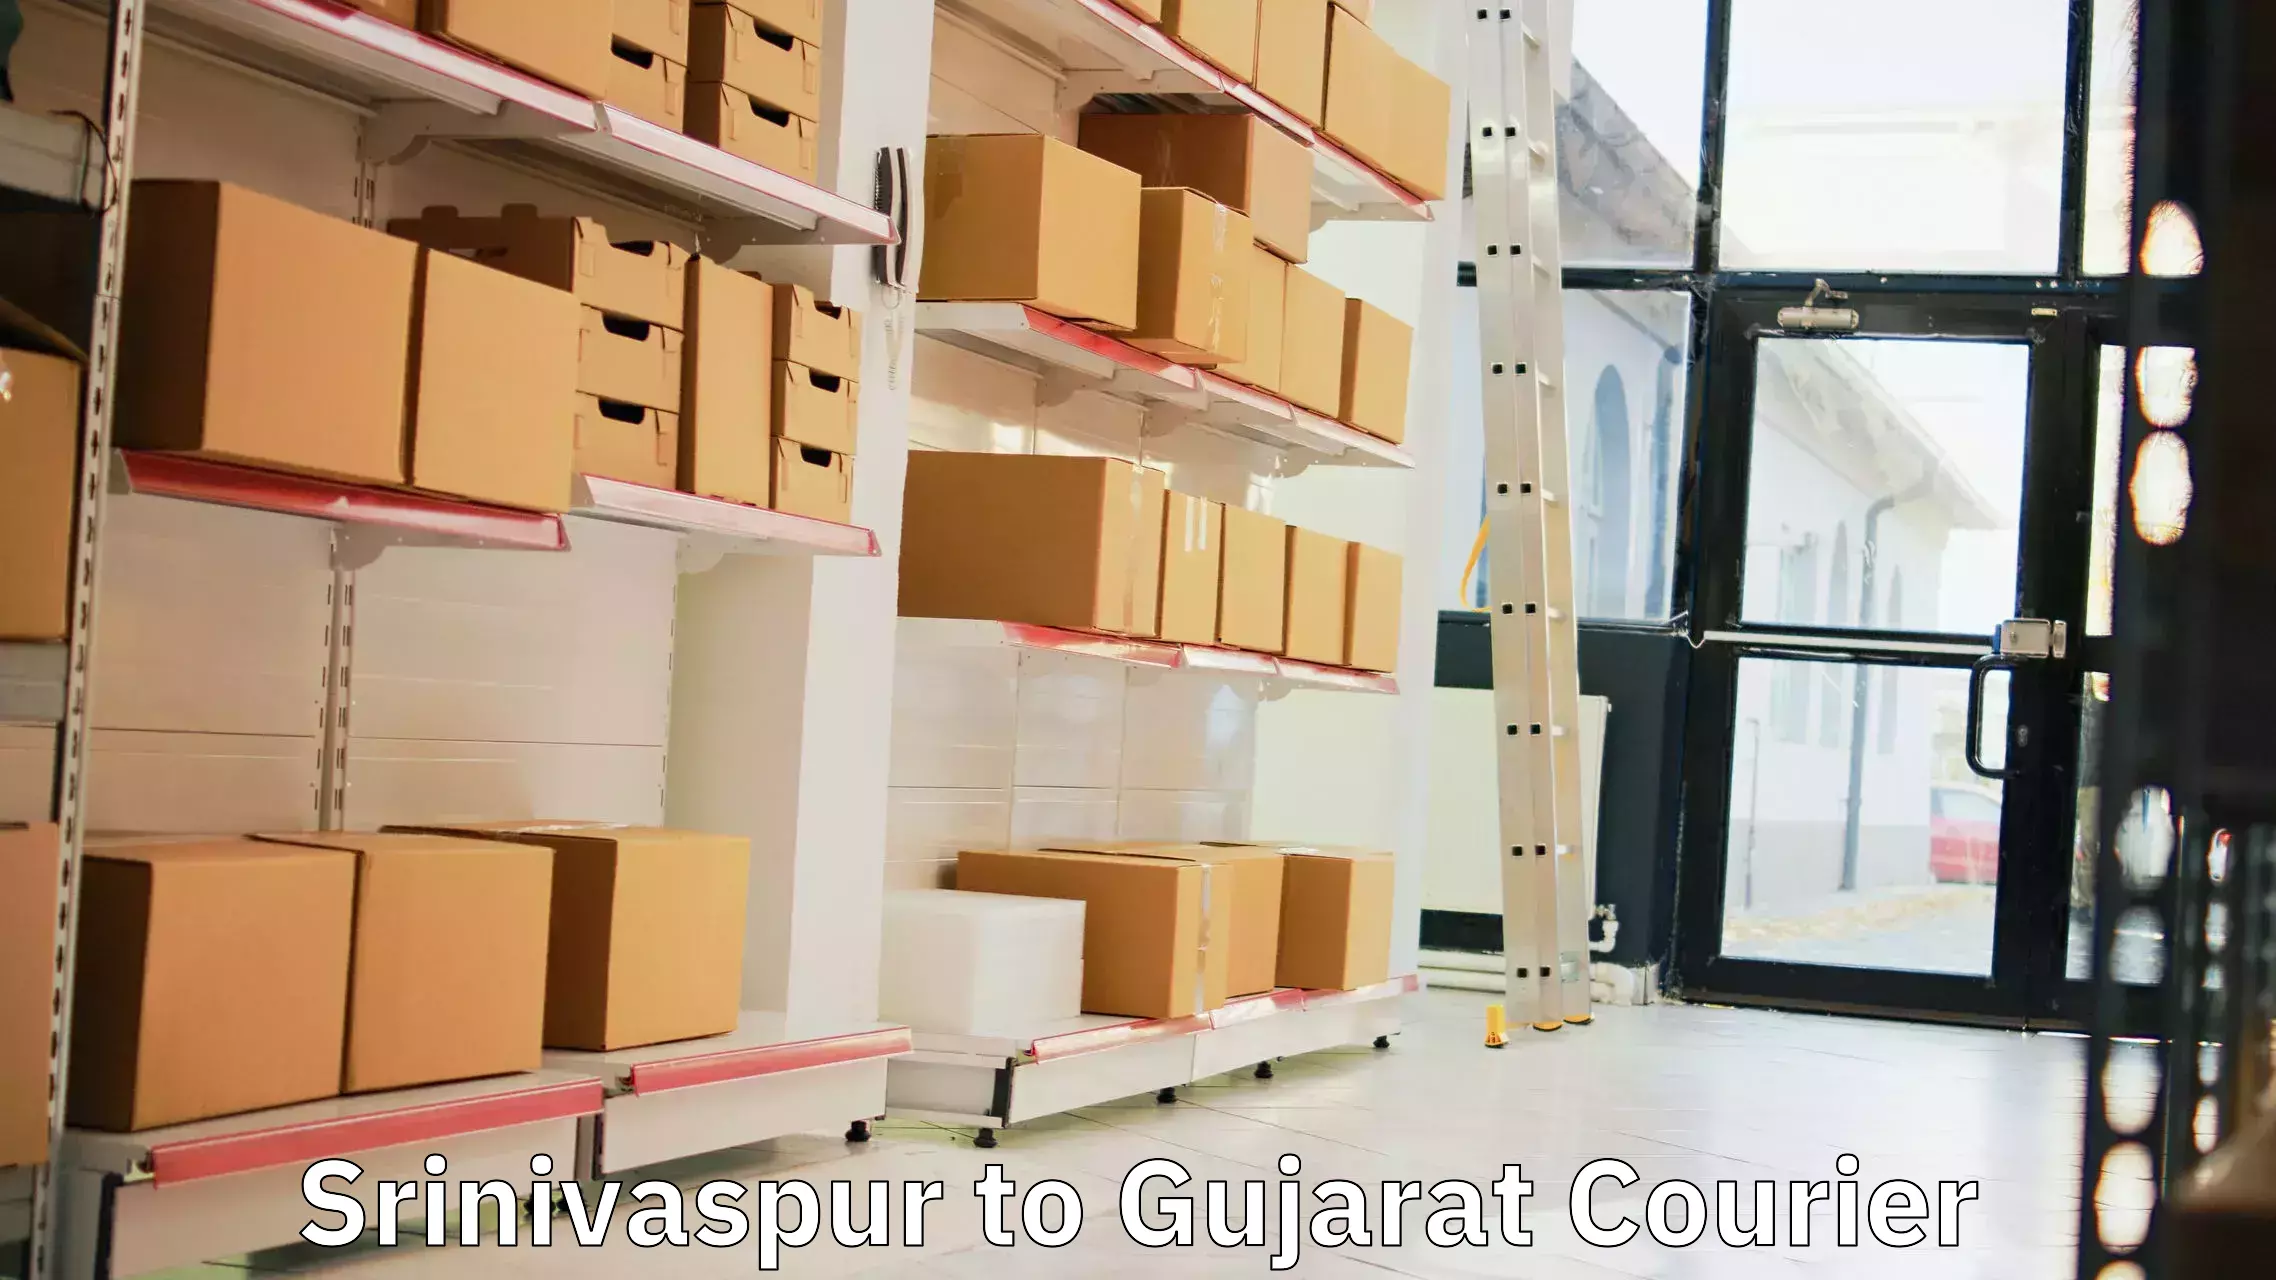 Nationwide shipping services Srinivaspur to Ahmedabad